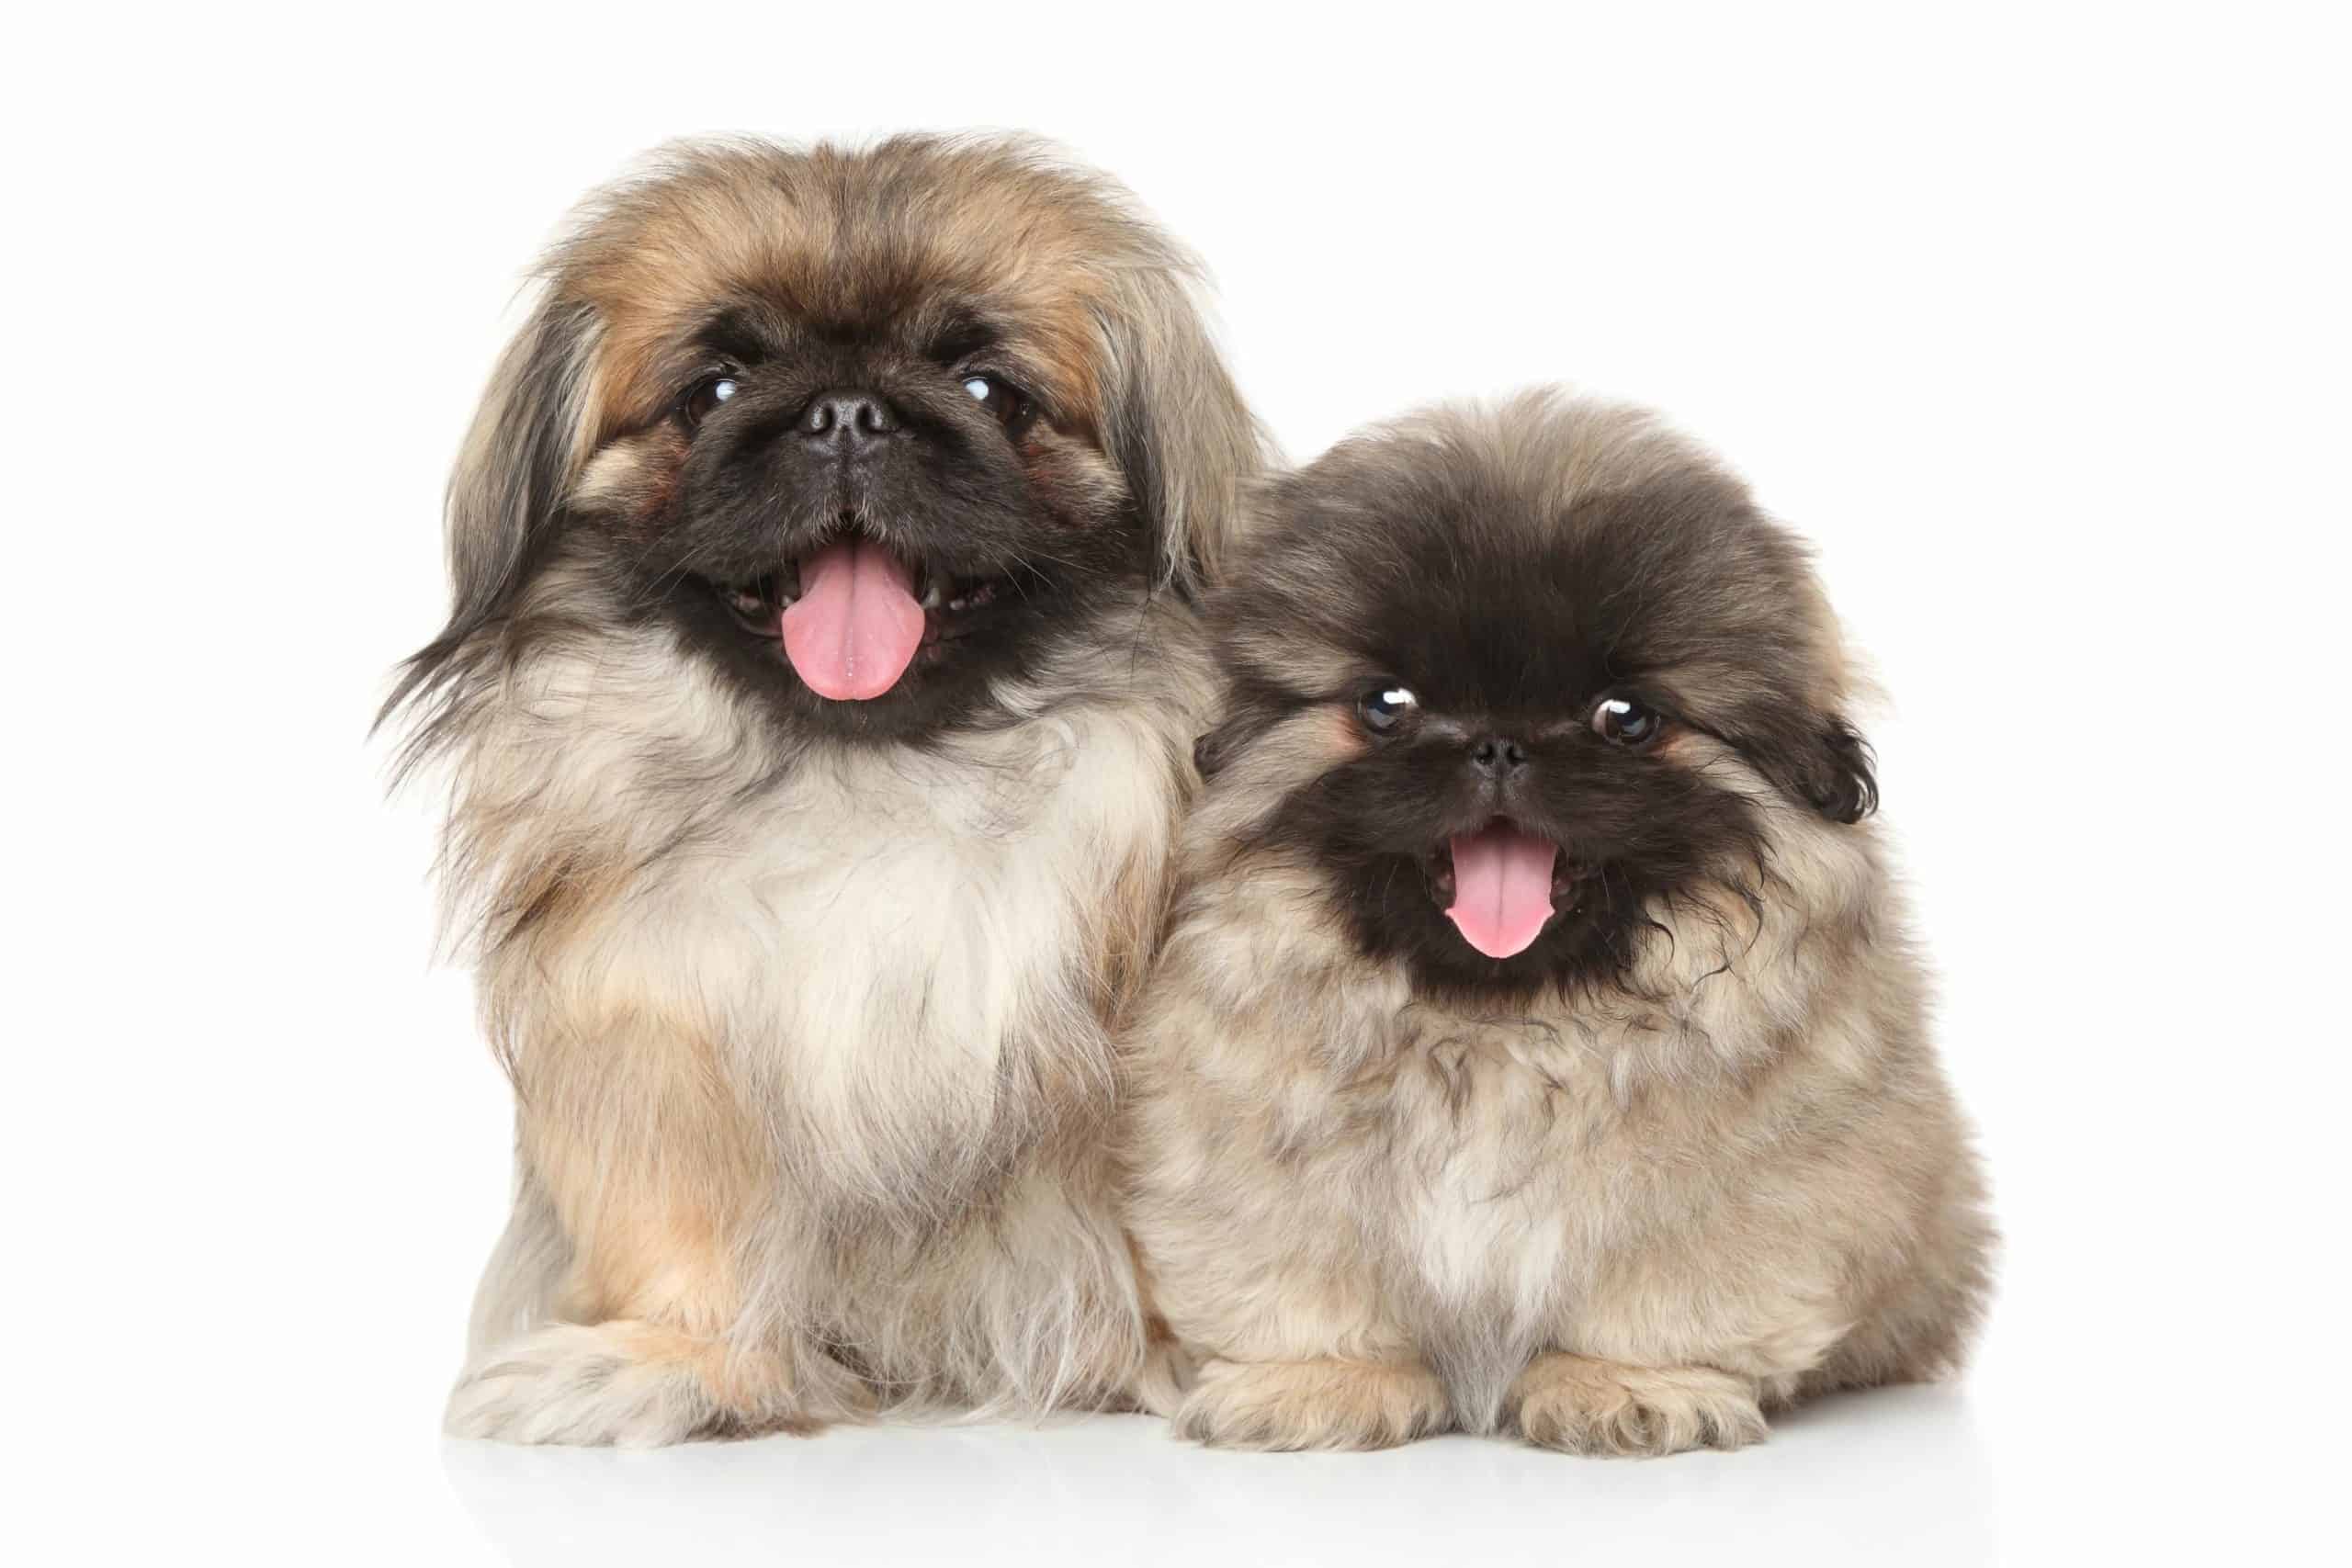 Happy Pekinese puppies on a white background. The Pekingese, also affectionately known as a Peke, is a calm dog when it reaches adulthood. It also likes to relax but needs daily walks like any other dog.